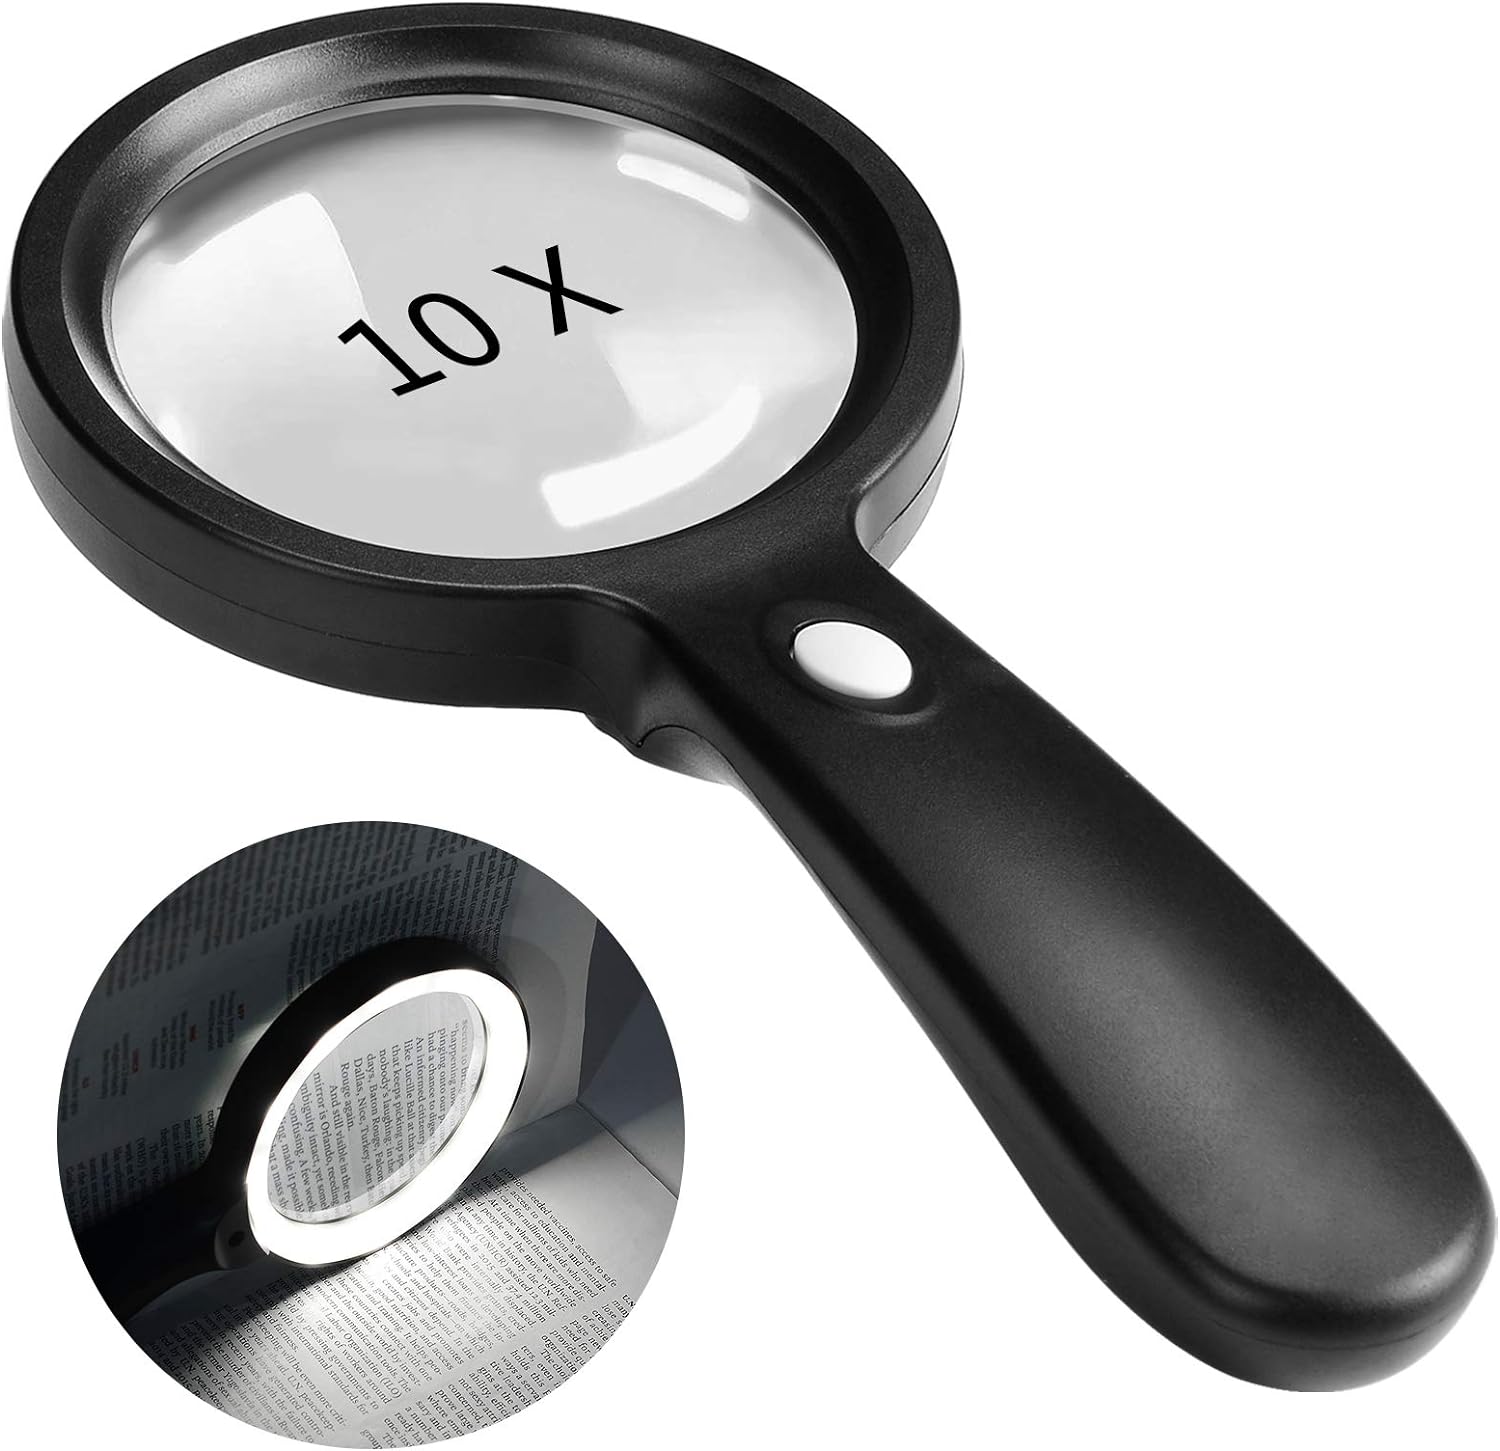 ShiSyan Aluminum Alloy 30x HD Magnifier with Light Metal Magnifier Reading Identification